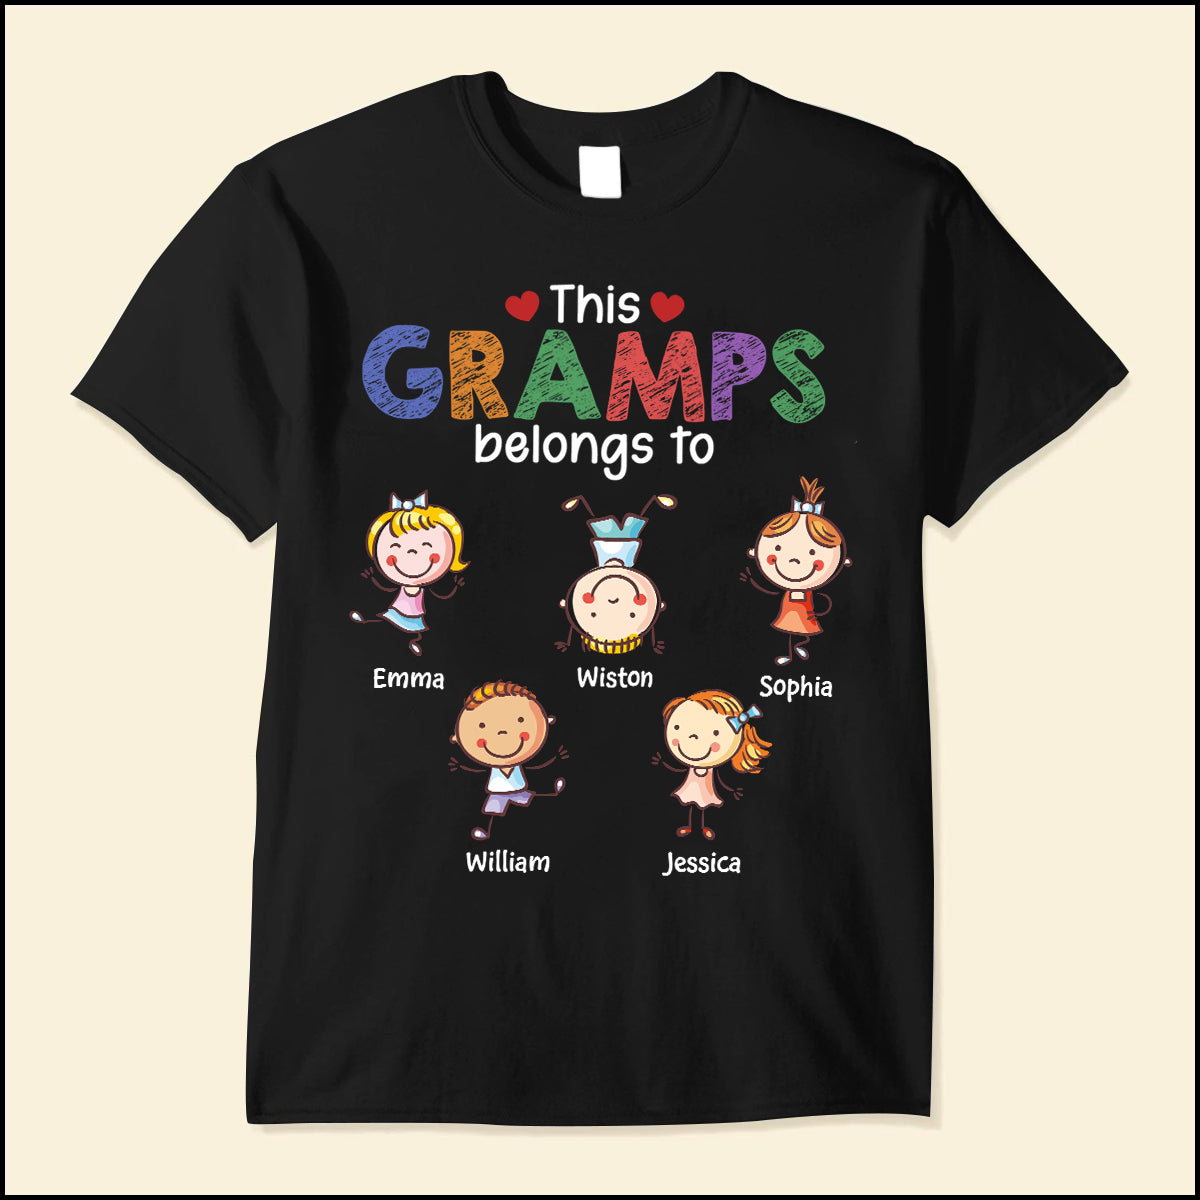 This Grandpa Daddy Belongs To - Gift For Dad, Father, Grandfather - Personalized Shirt NVL24APR24TT2